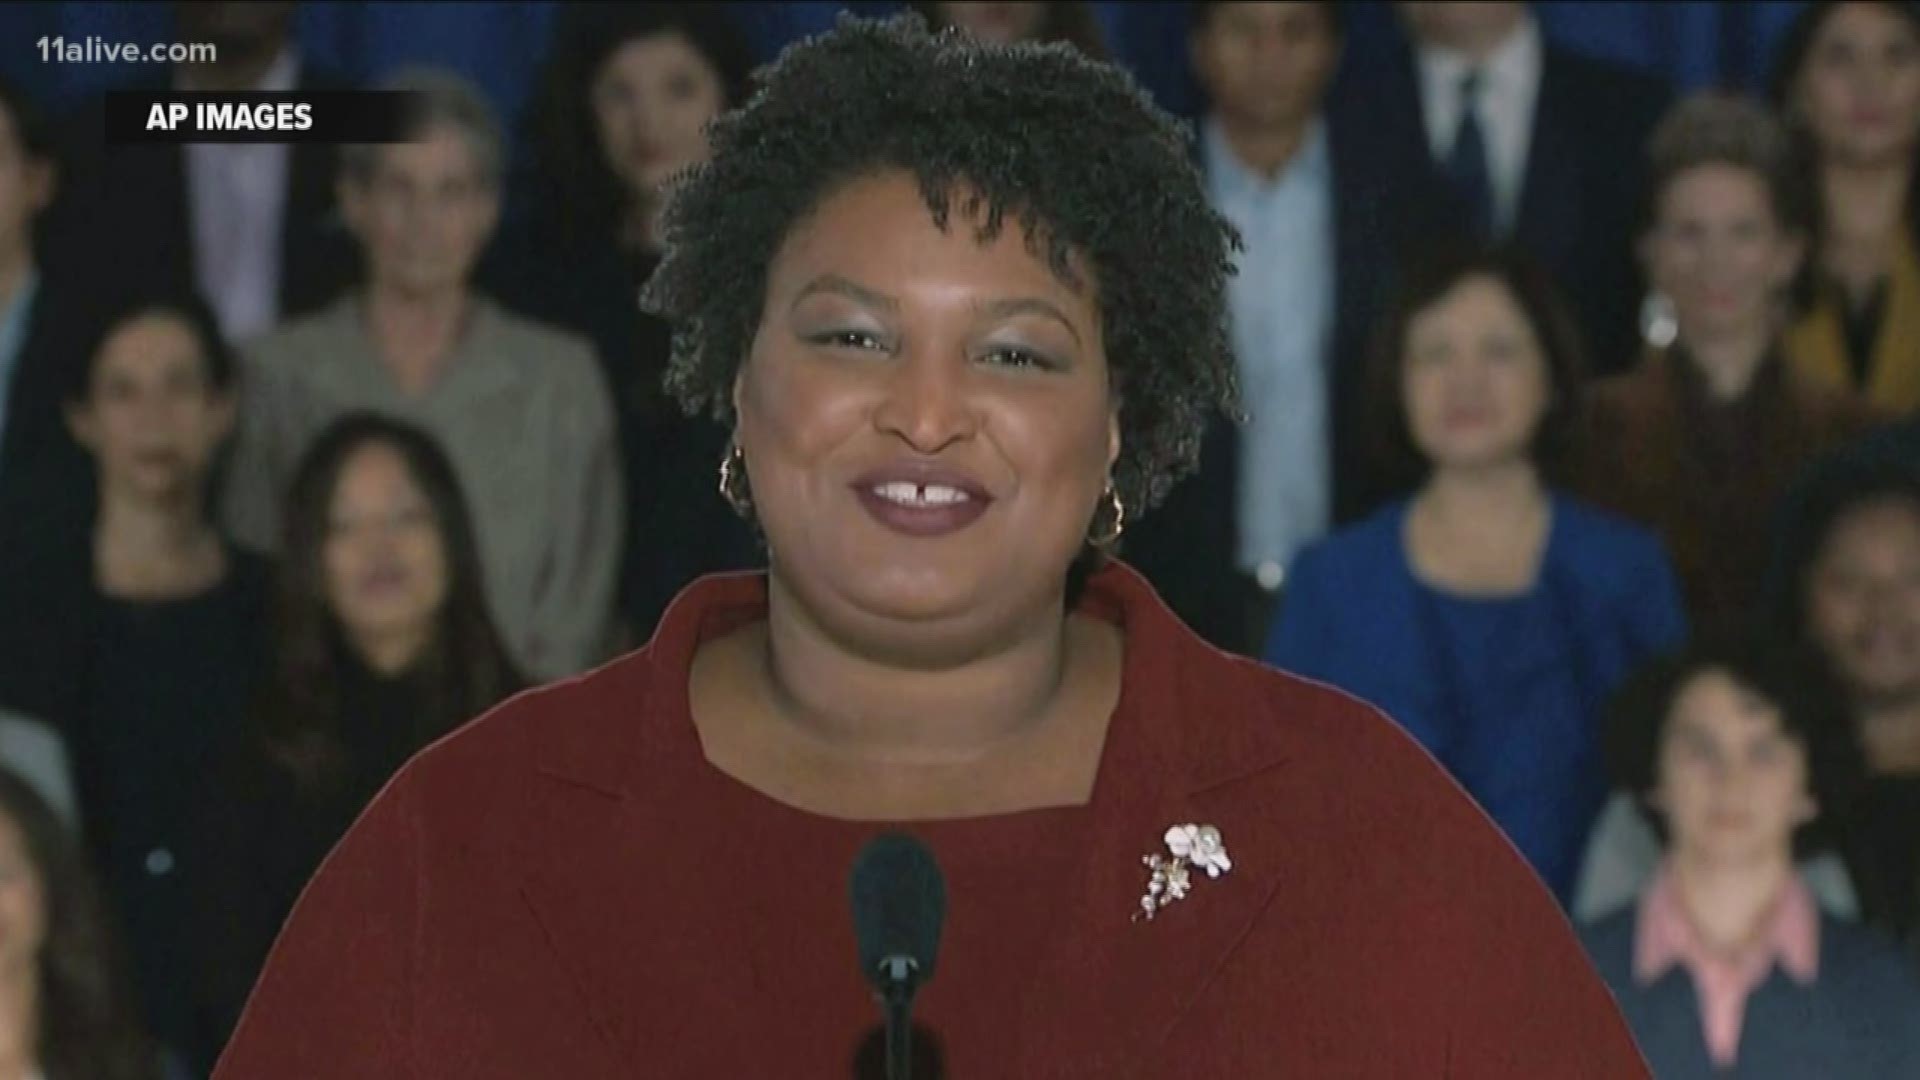 Abrams said she decided not to run because she wants to be of service to the candidates that have robust ideas.